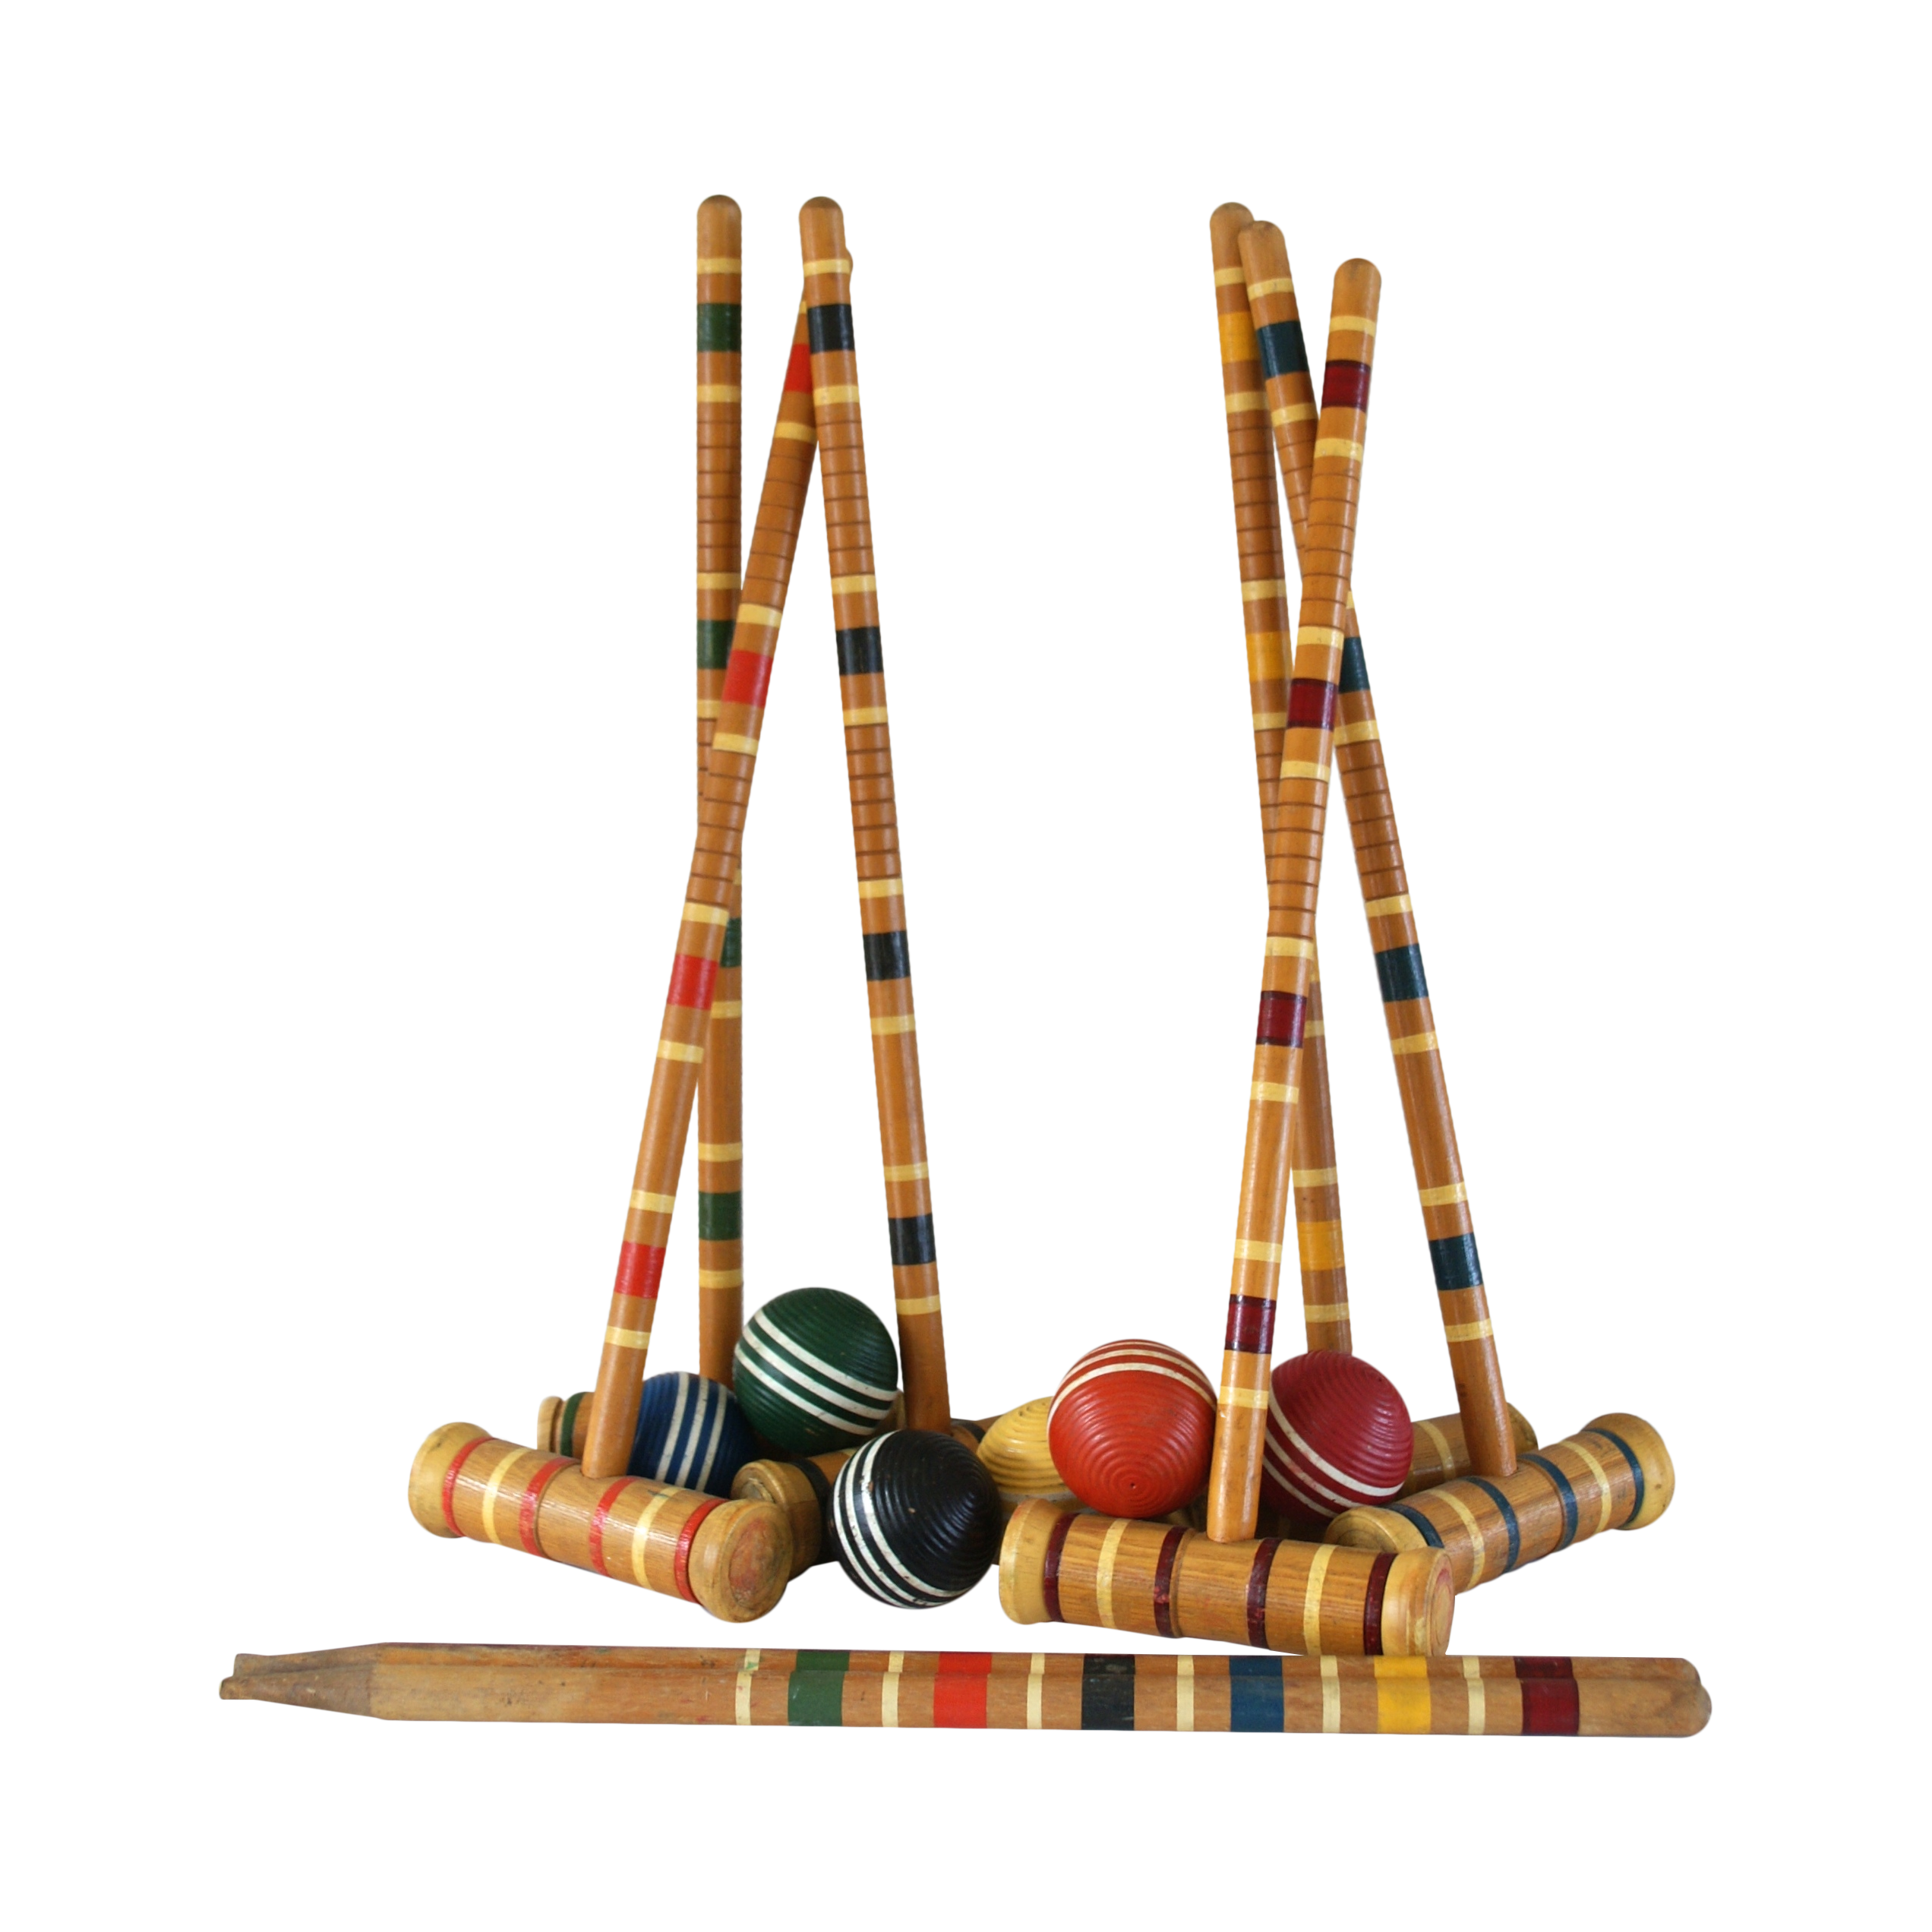 Croquet Sticks And Croquet Balls Stacked Together